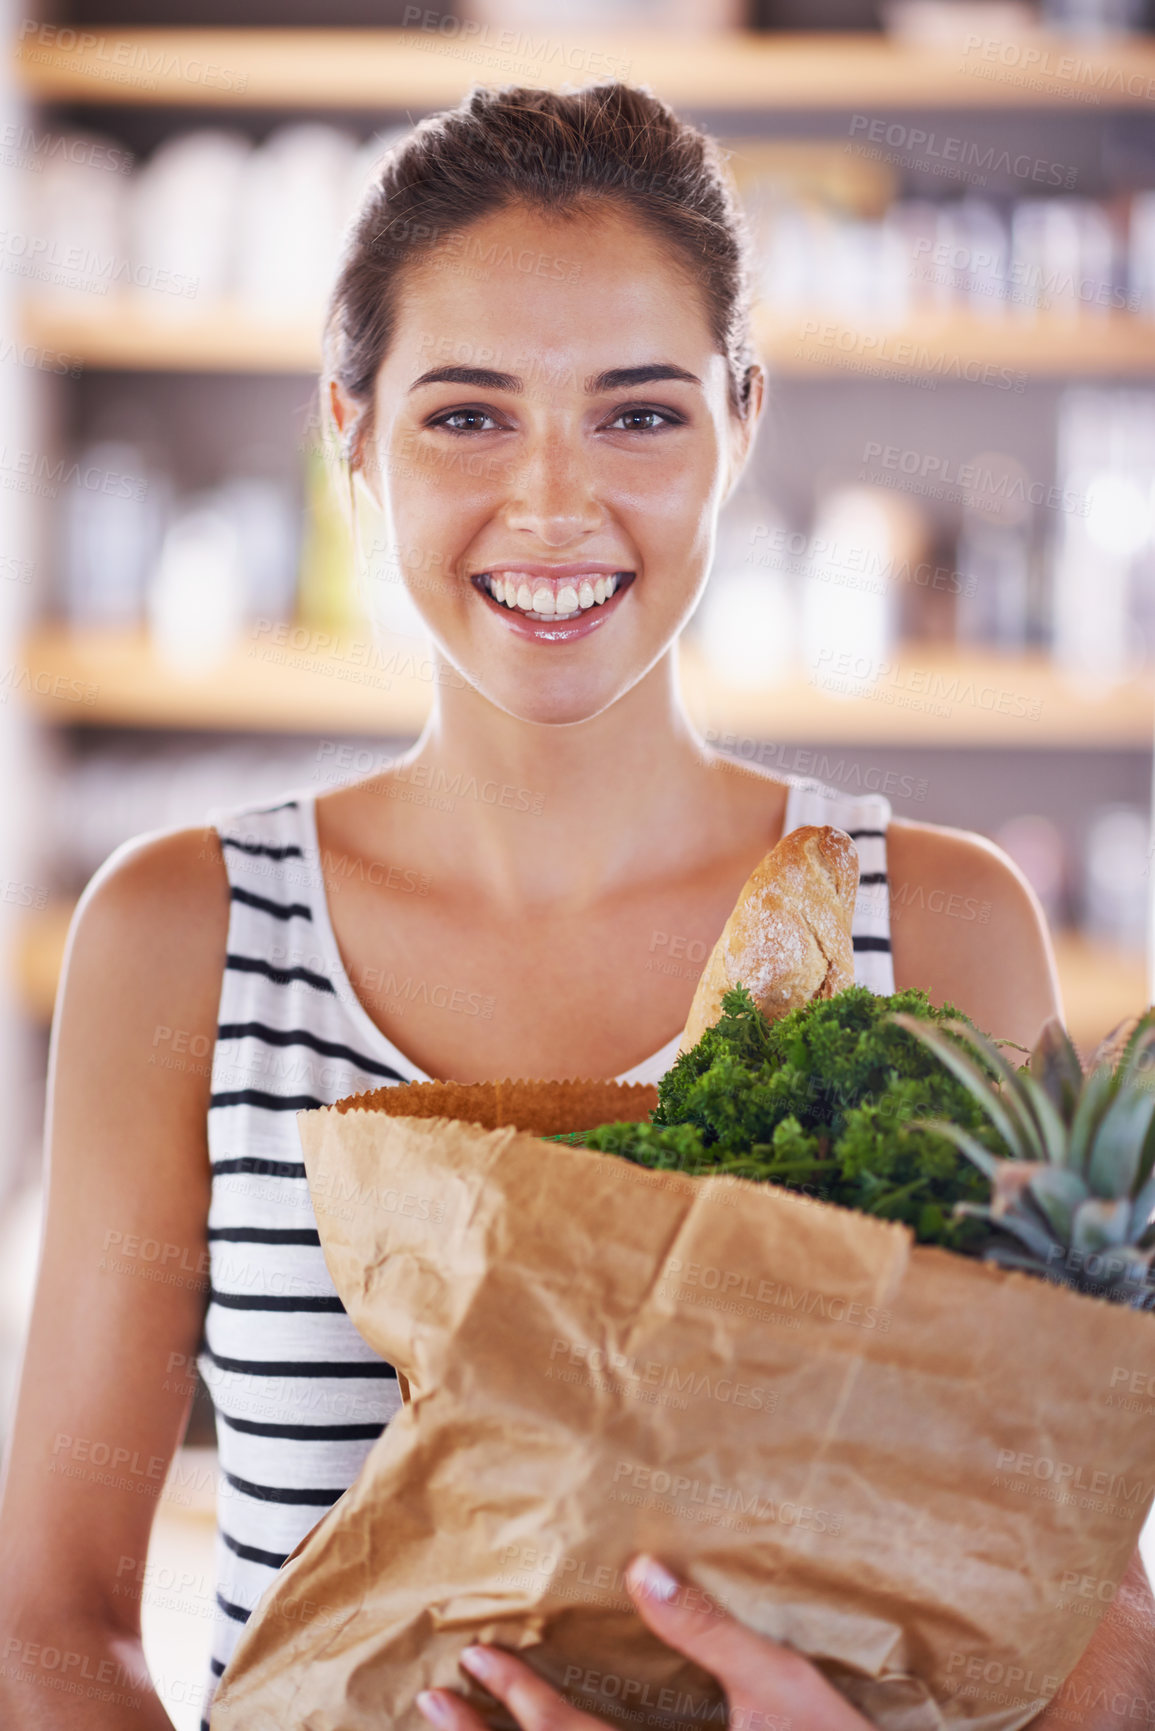 Buy stock photo Home, happy or portrait of woman with groceries on promotion, sale or discounts deal on nutrition. Smile, delivery offer or female person and buying healthy food to cook organic fruits or diet choice